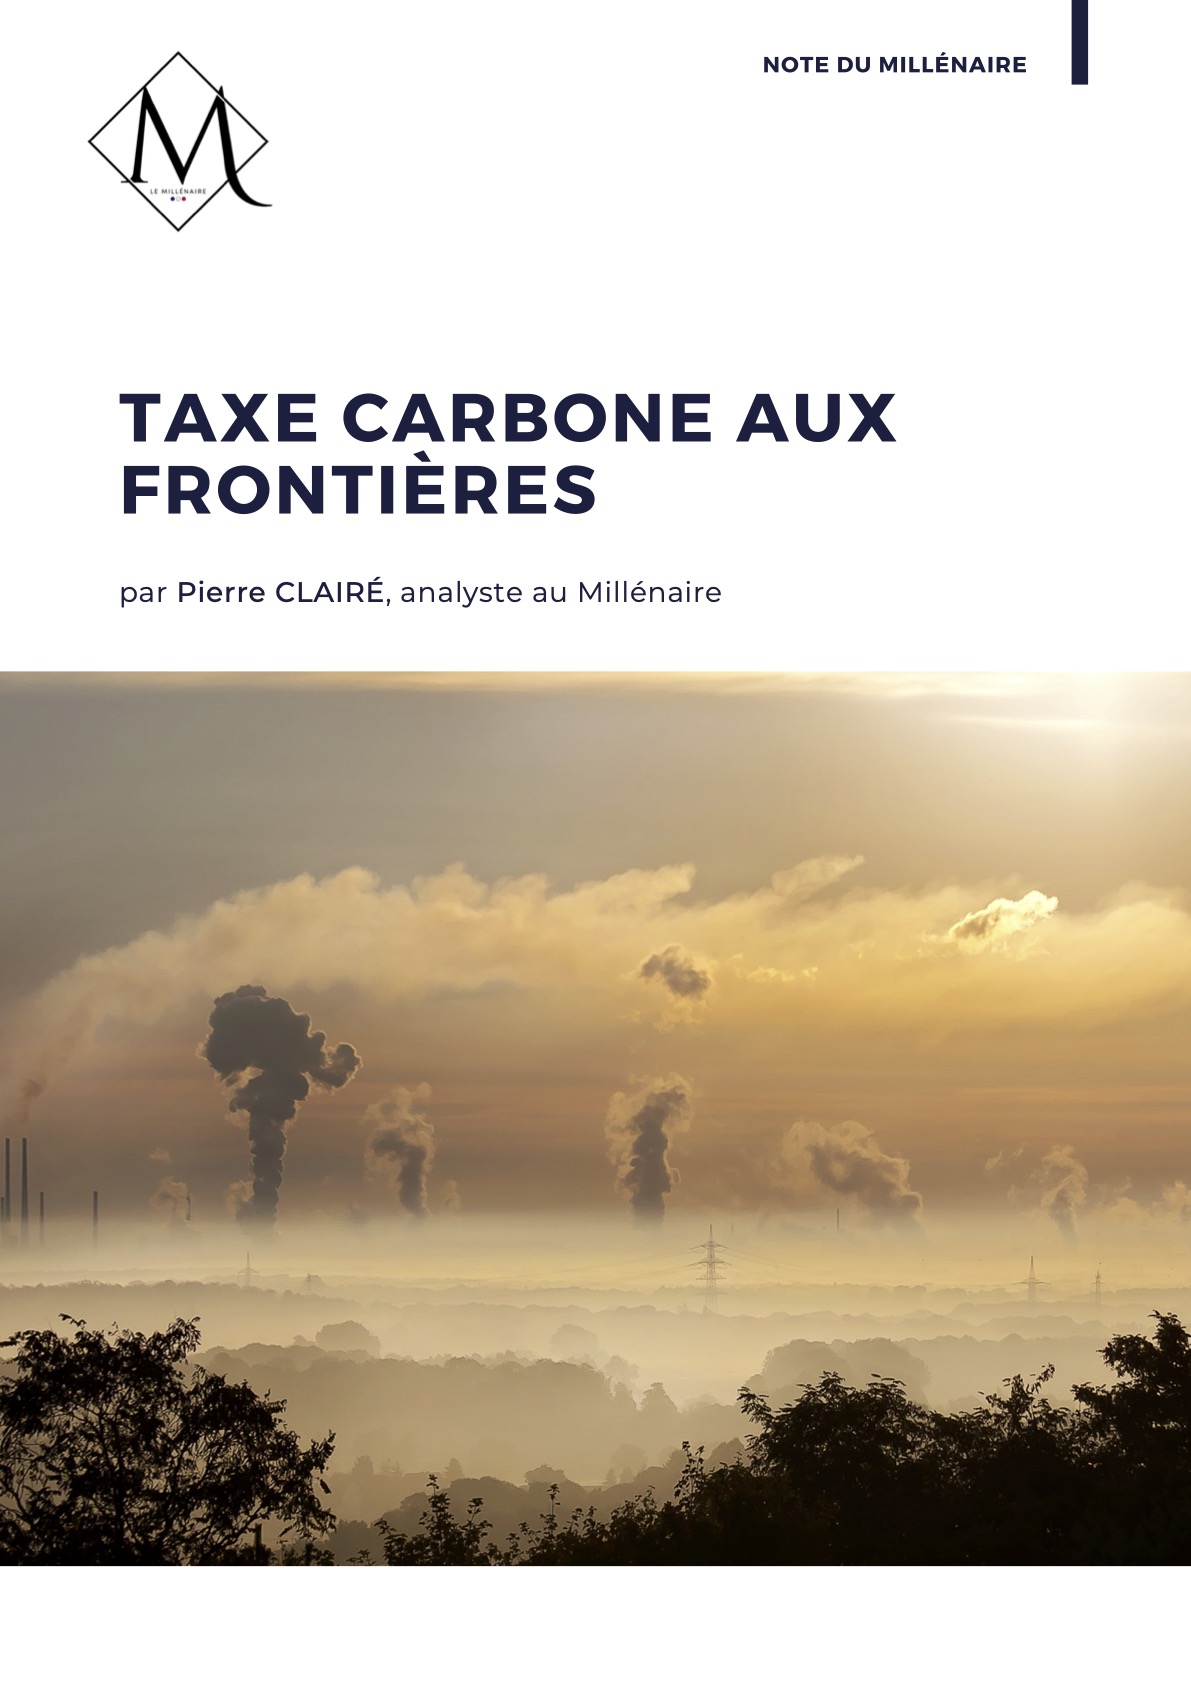 Note-Taxe-carbone